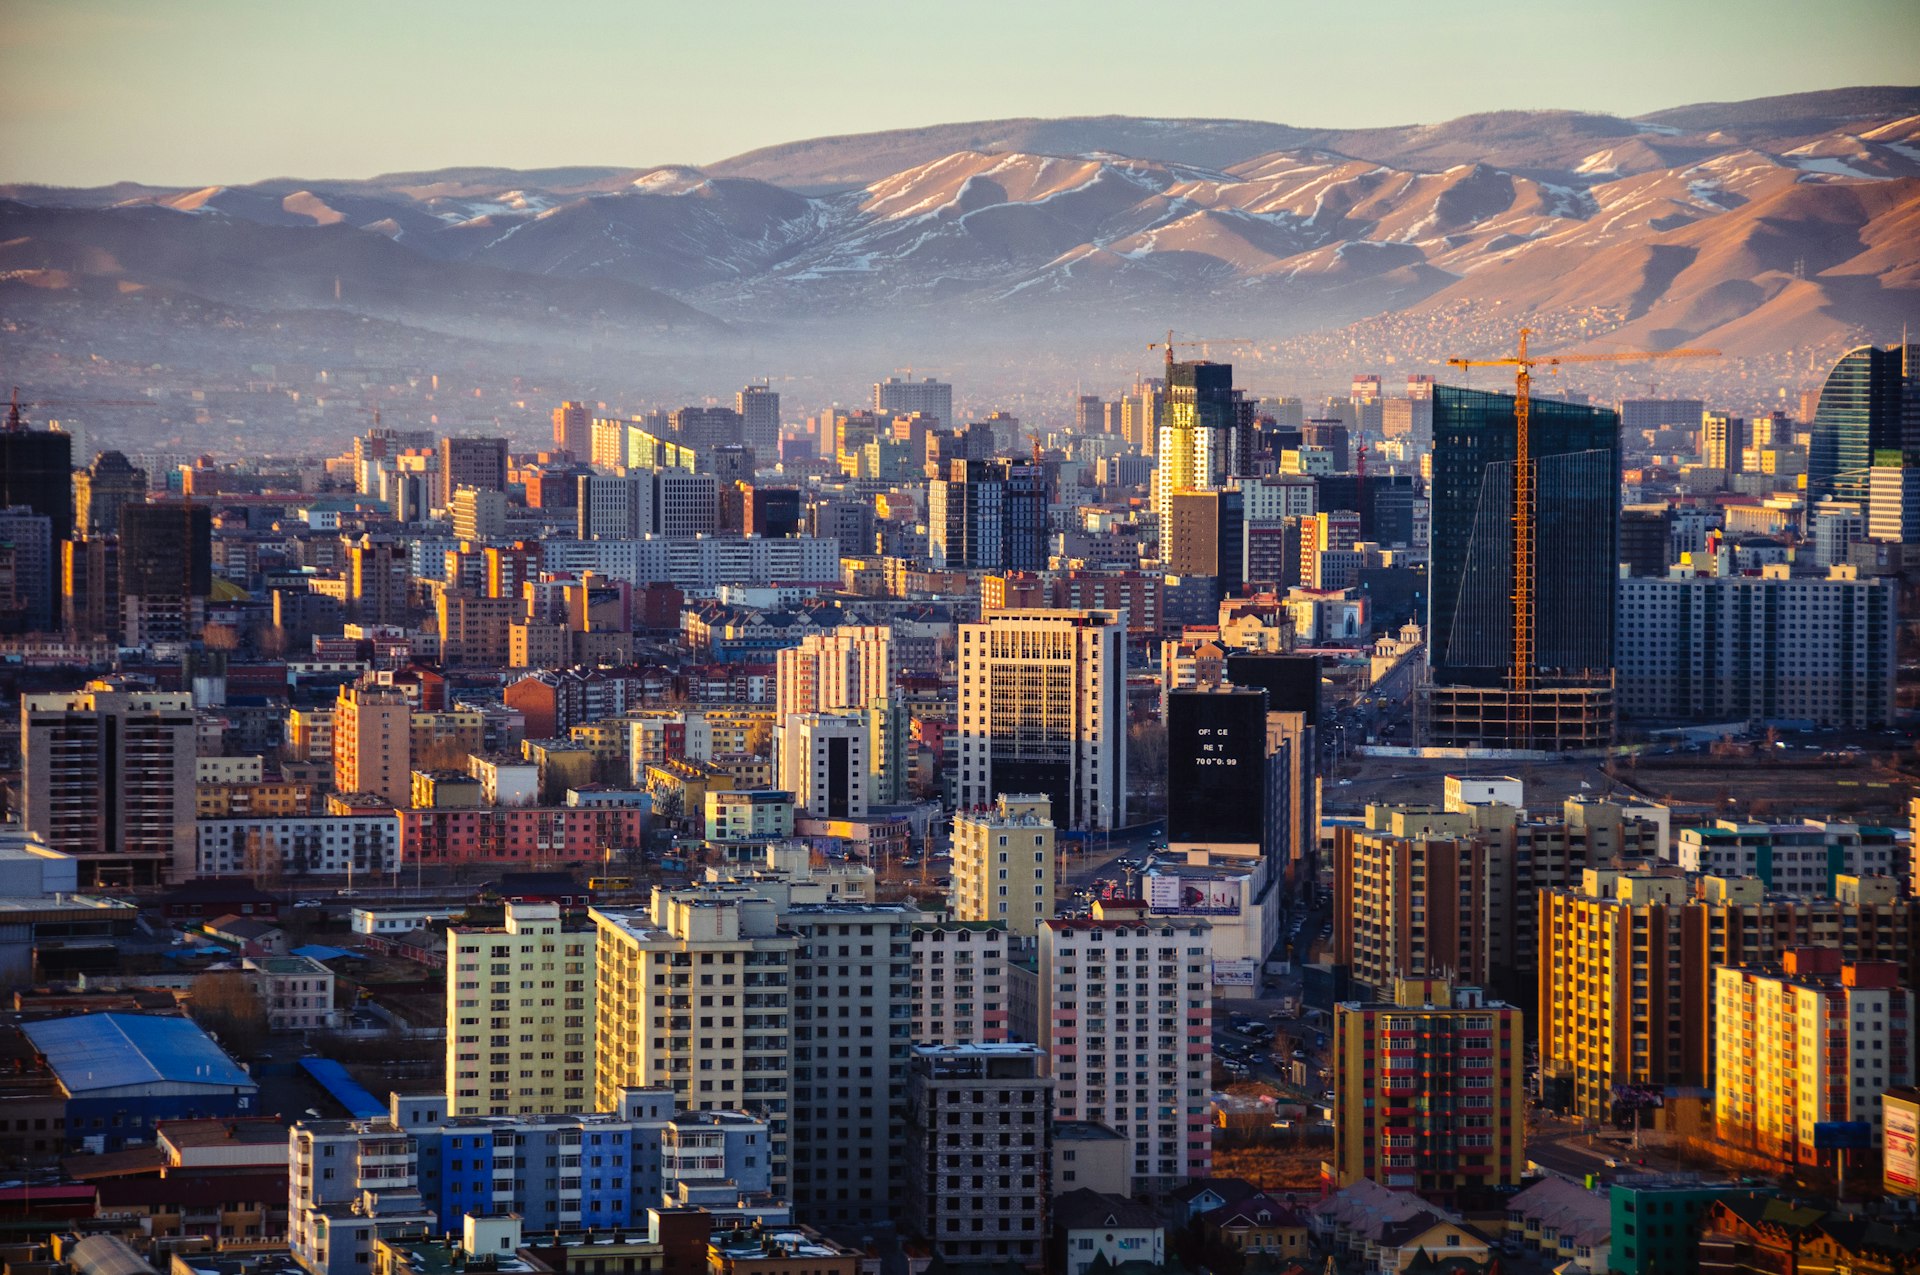 A sunset view over Ulaanbaatar, the capital of Mongolia